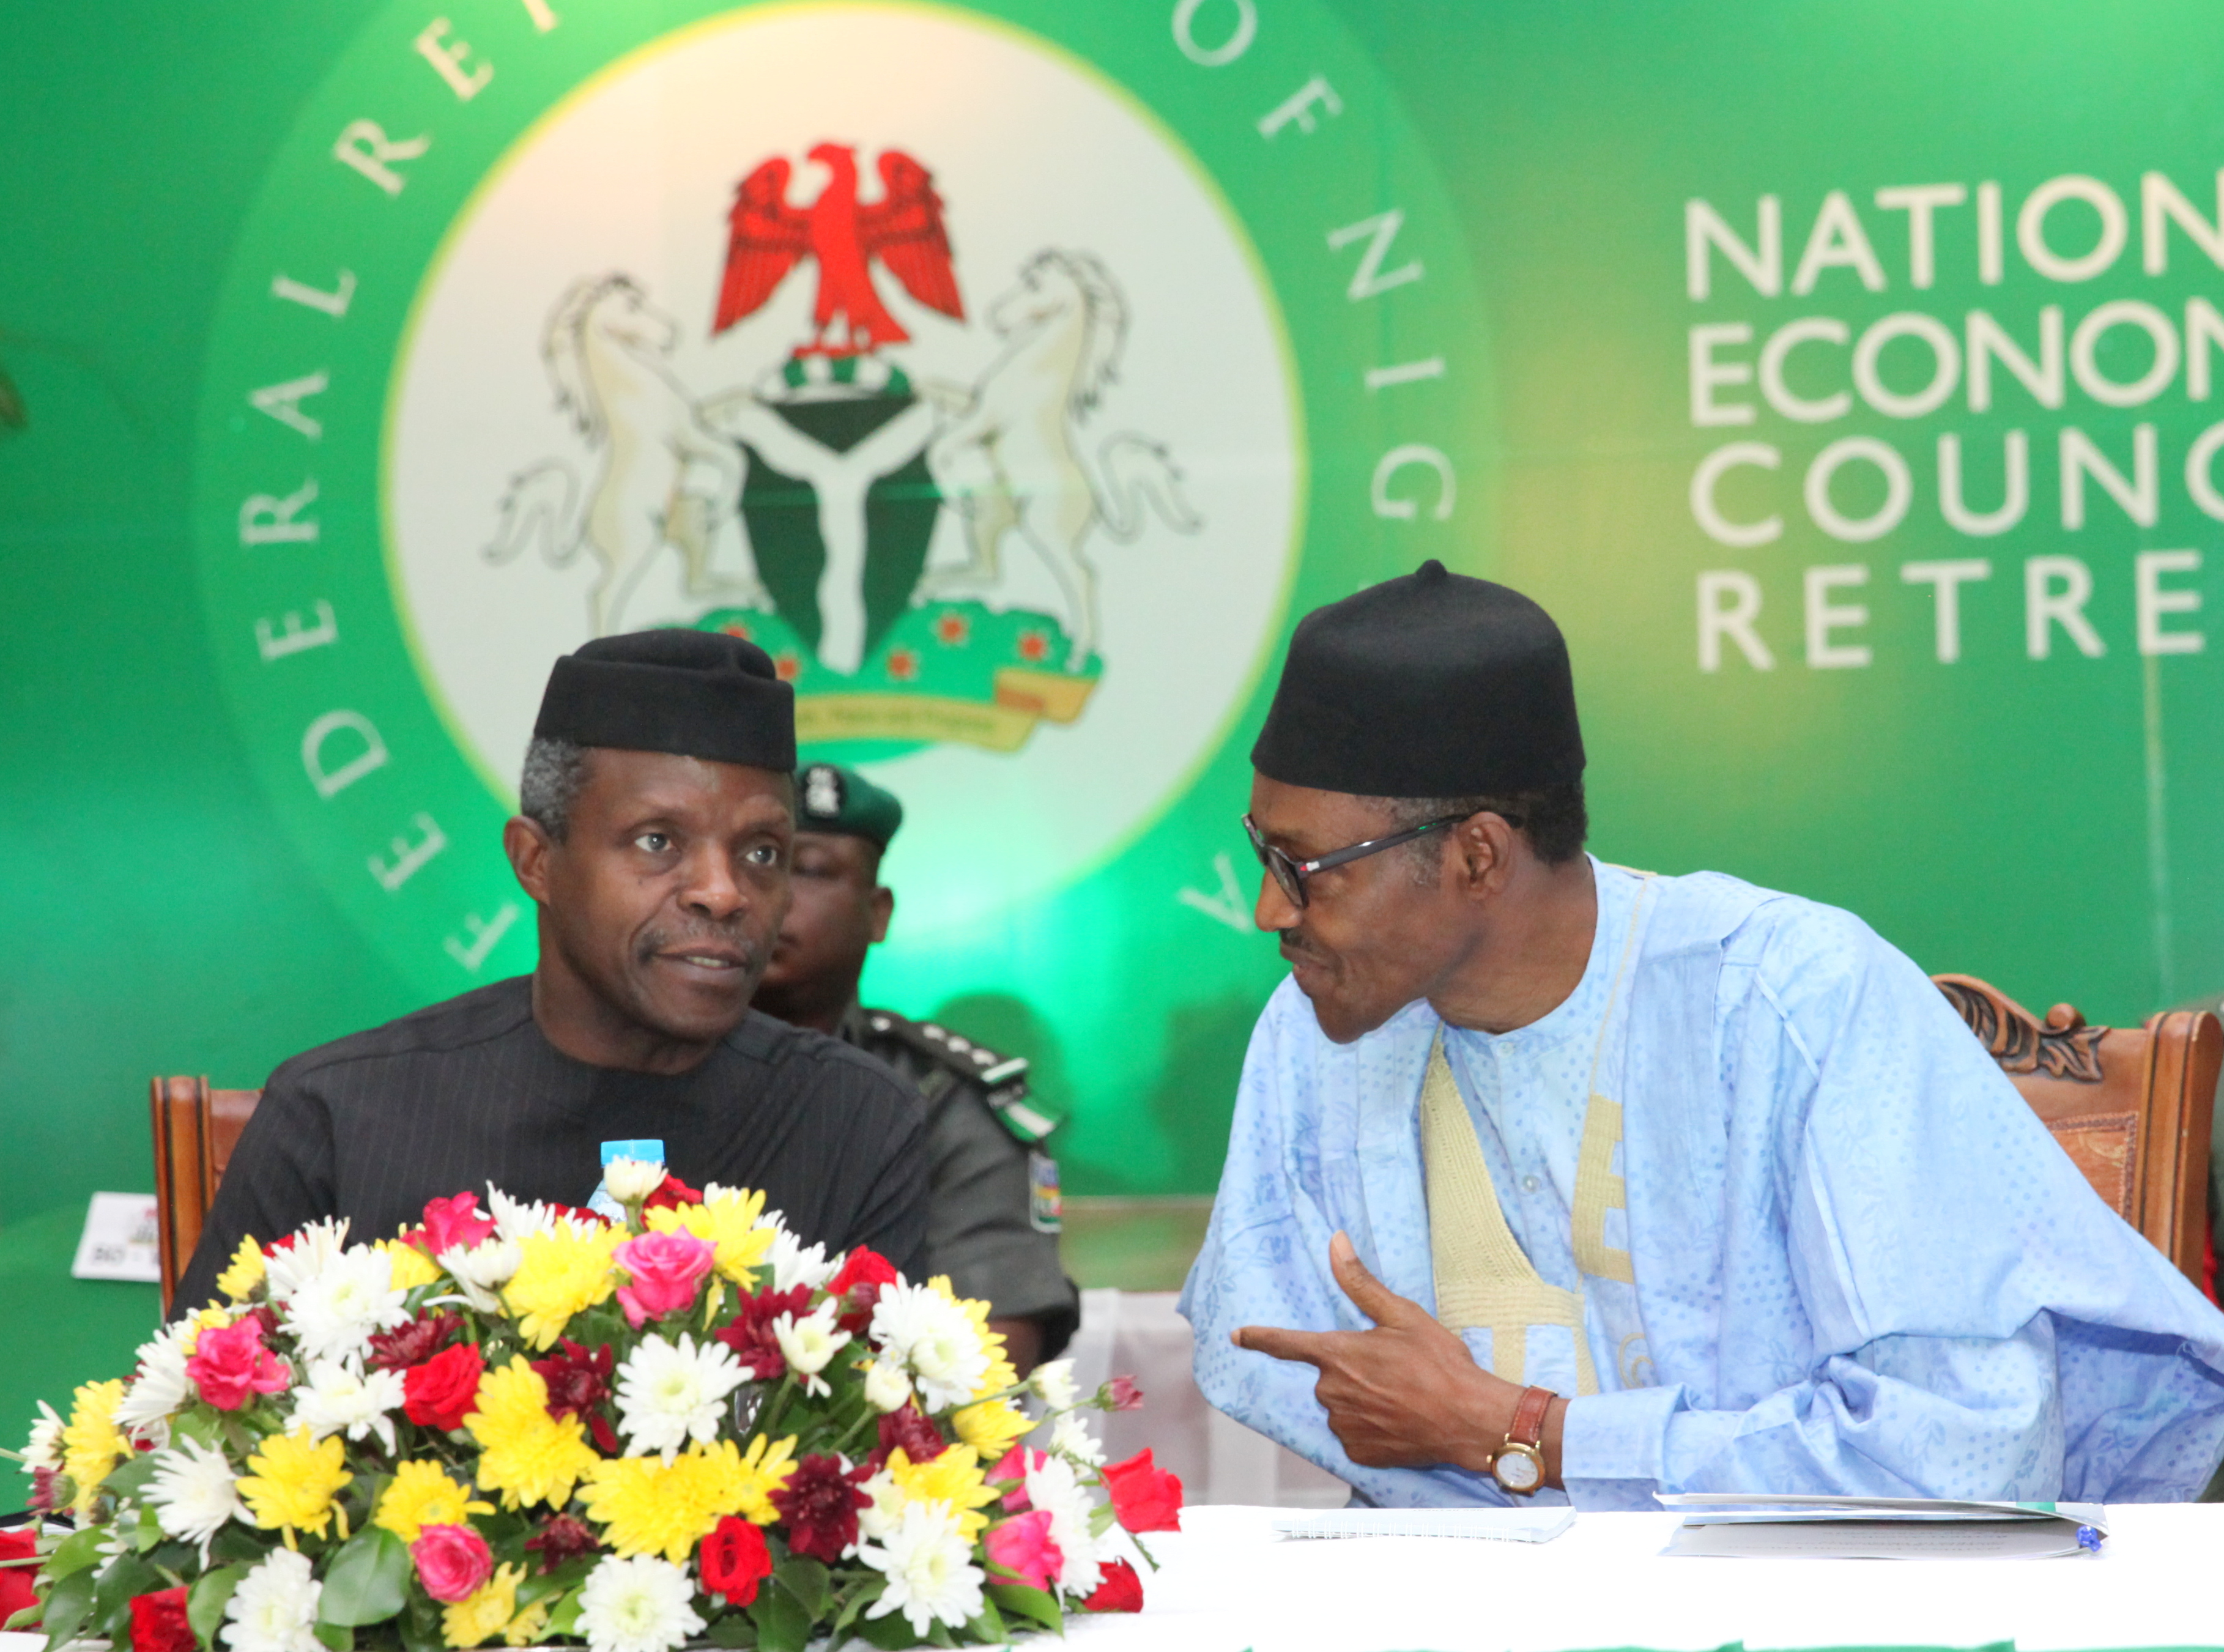 VP Osinbajo Attends National Economic Council Retreat Themed “Nigerian States, Multiple Centers Of Prosperity” On 21/03/2016